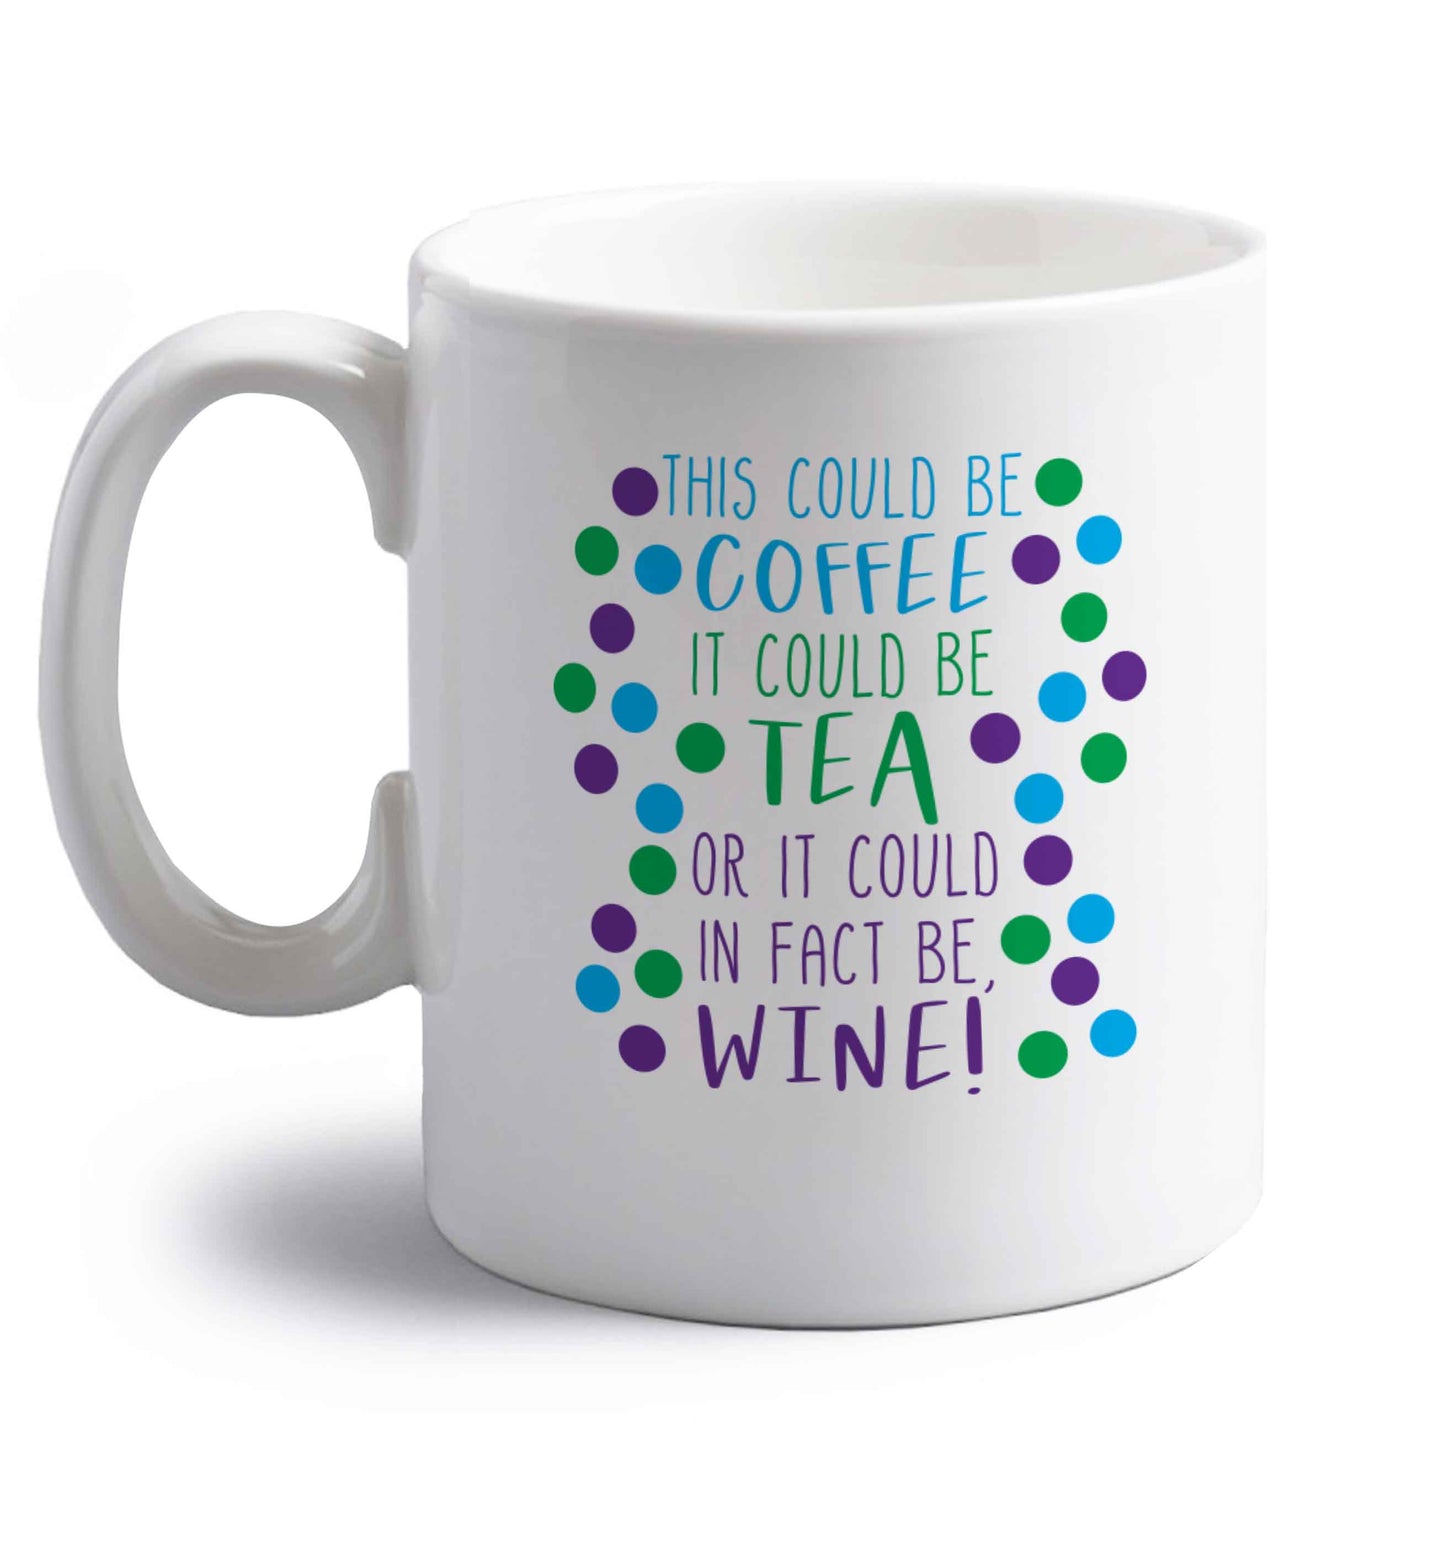 This could be tea, it could be coffee, or it could in fact be wine right handed white ceramic mug 